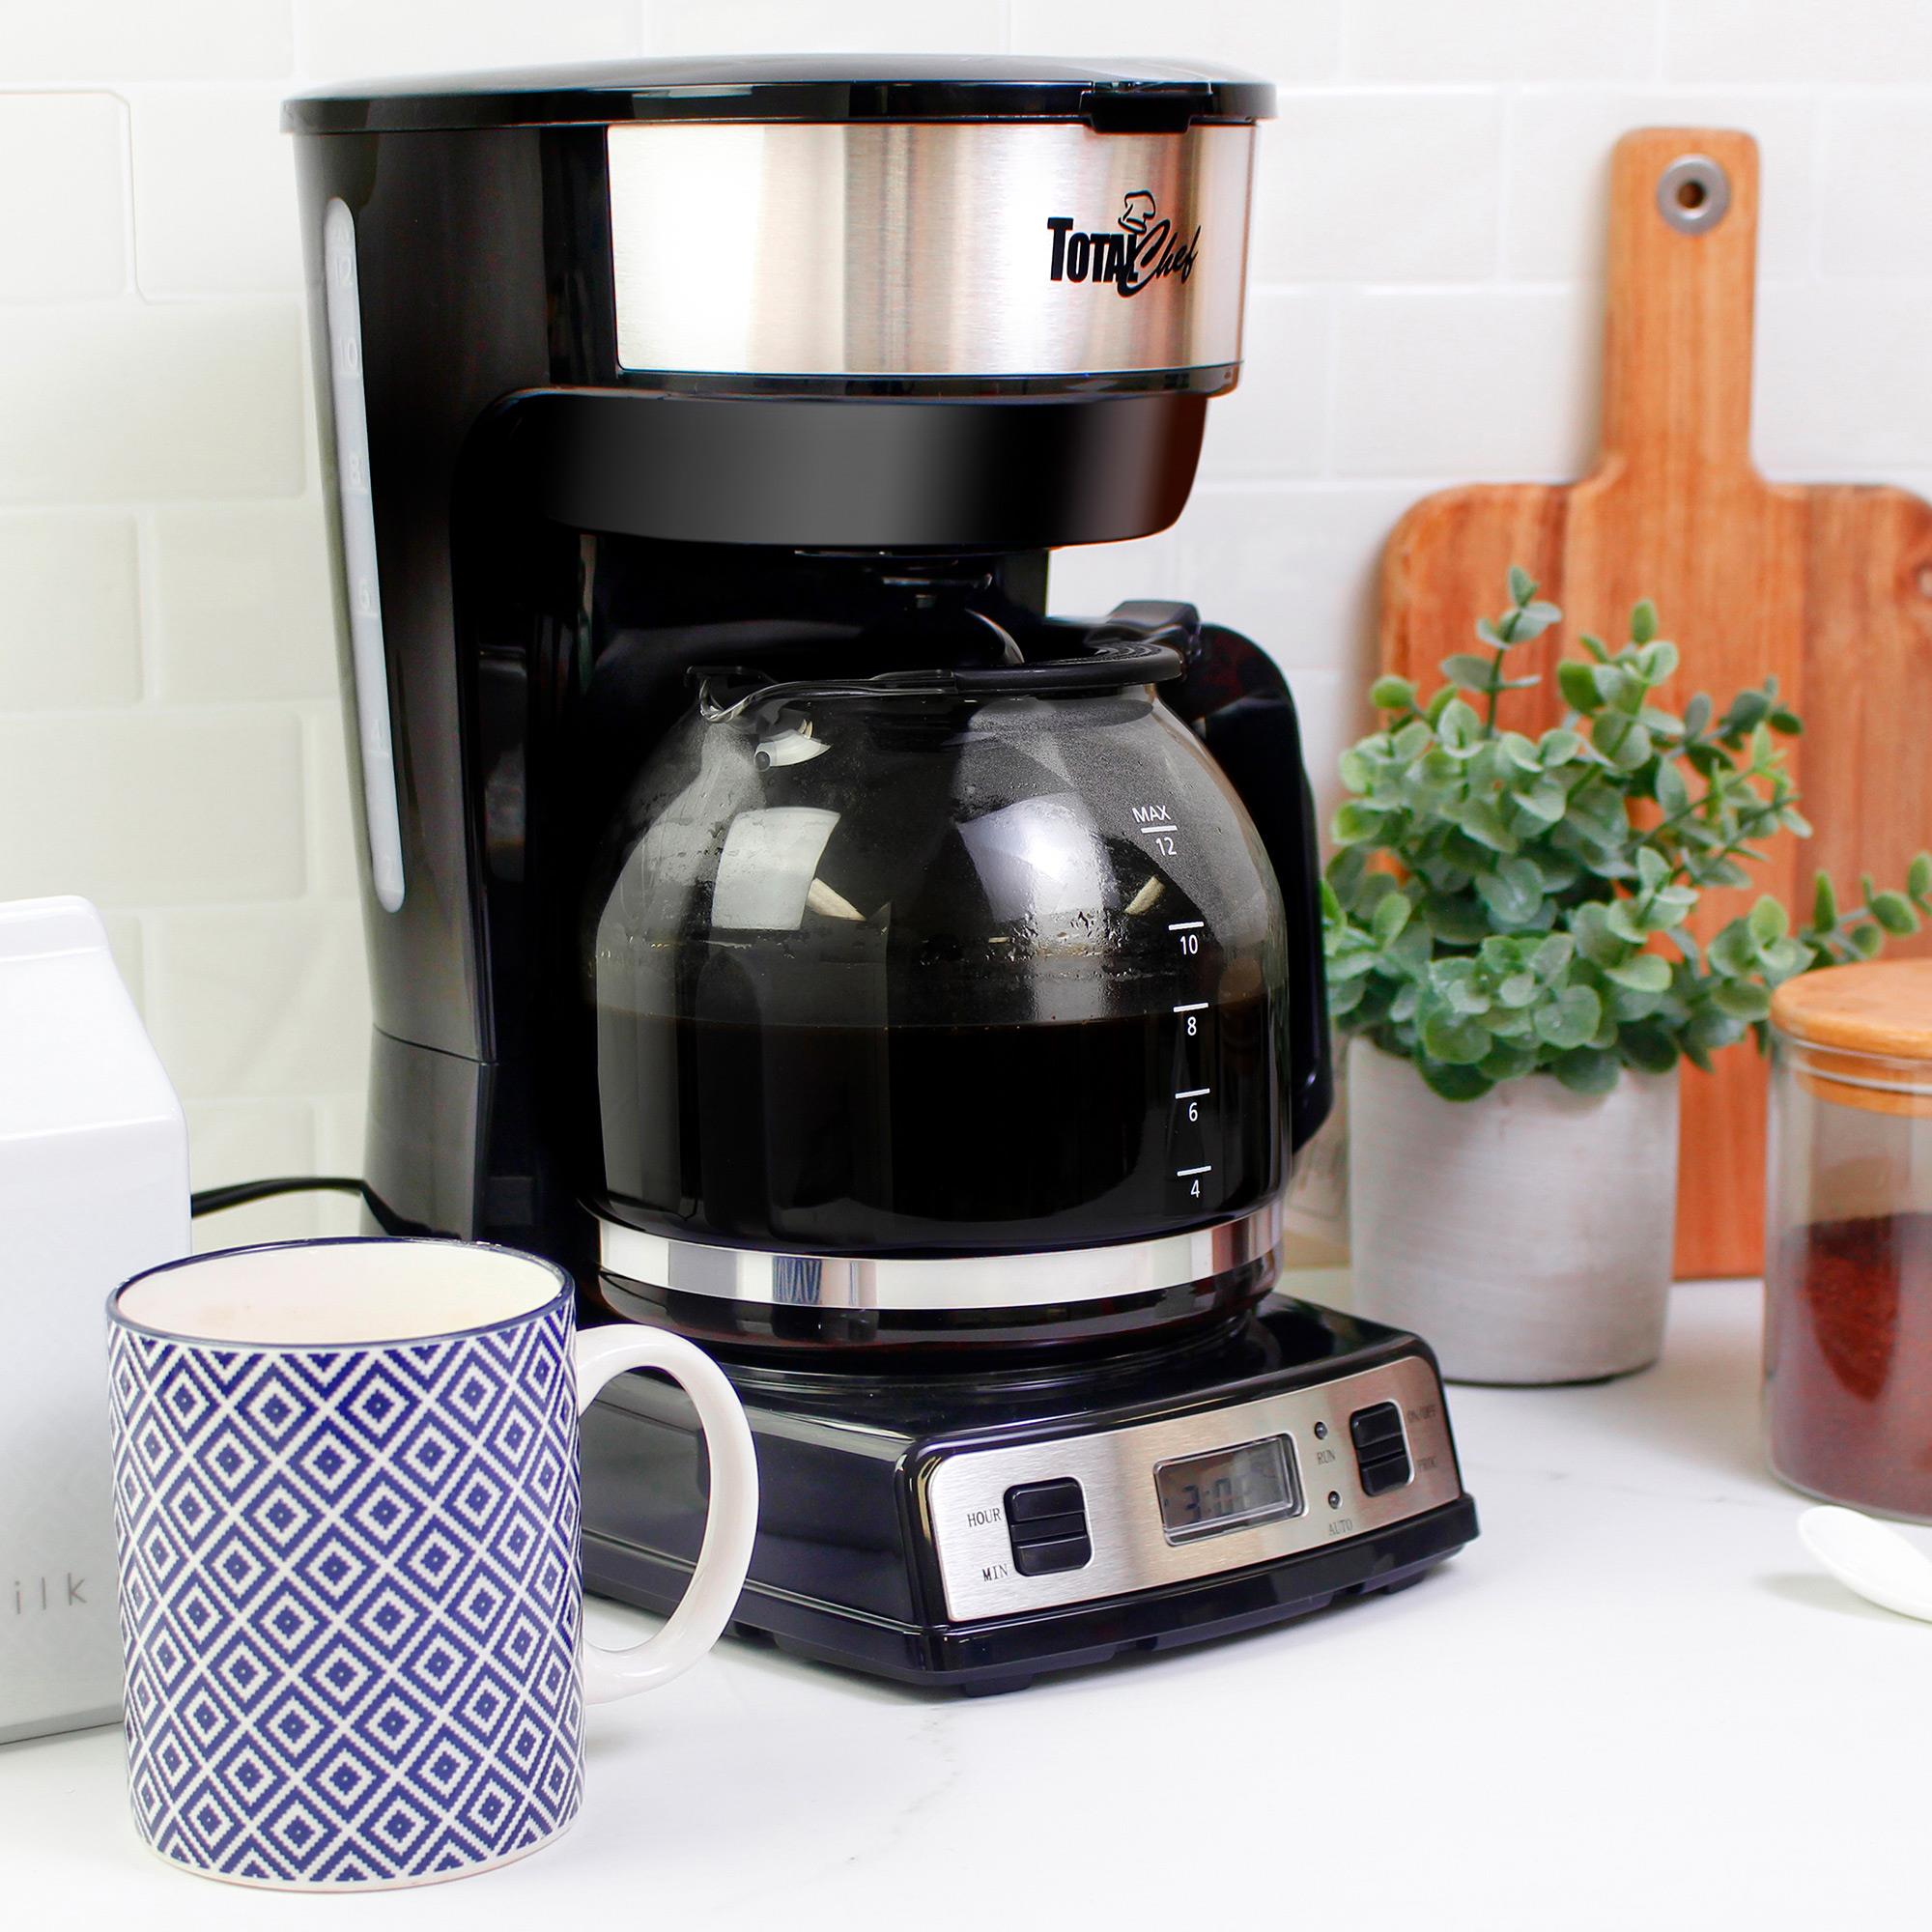 Mainstays Programmable Coffee Maker - 12 Cup Each